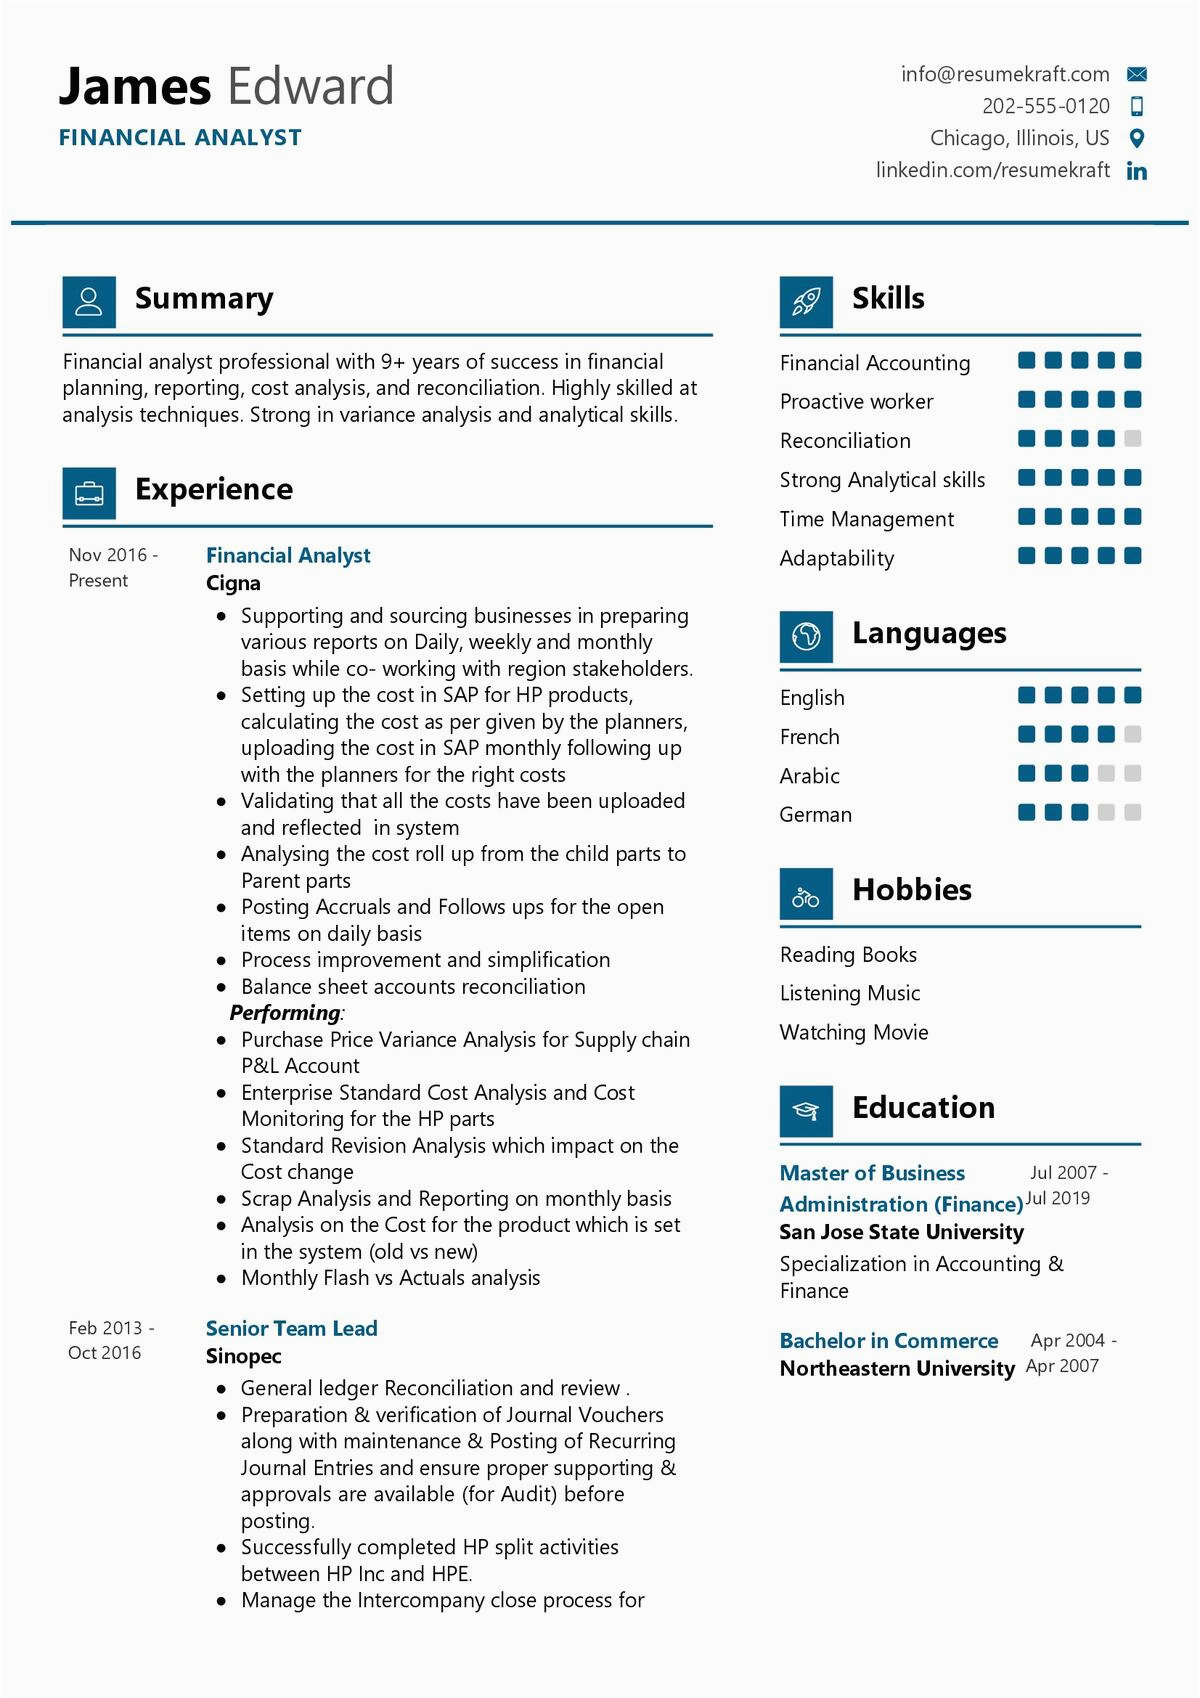 Sample Resume for Financial Analyst Position Financial Analyst Resume Sample Resumekraft